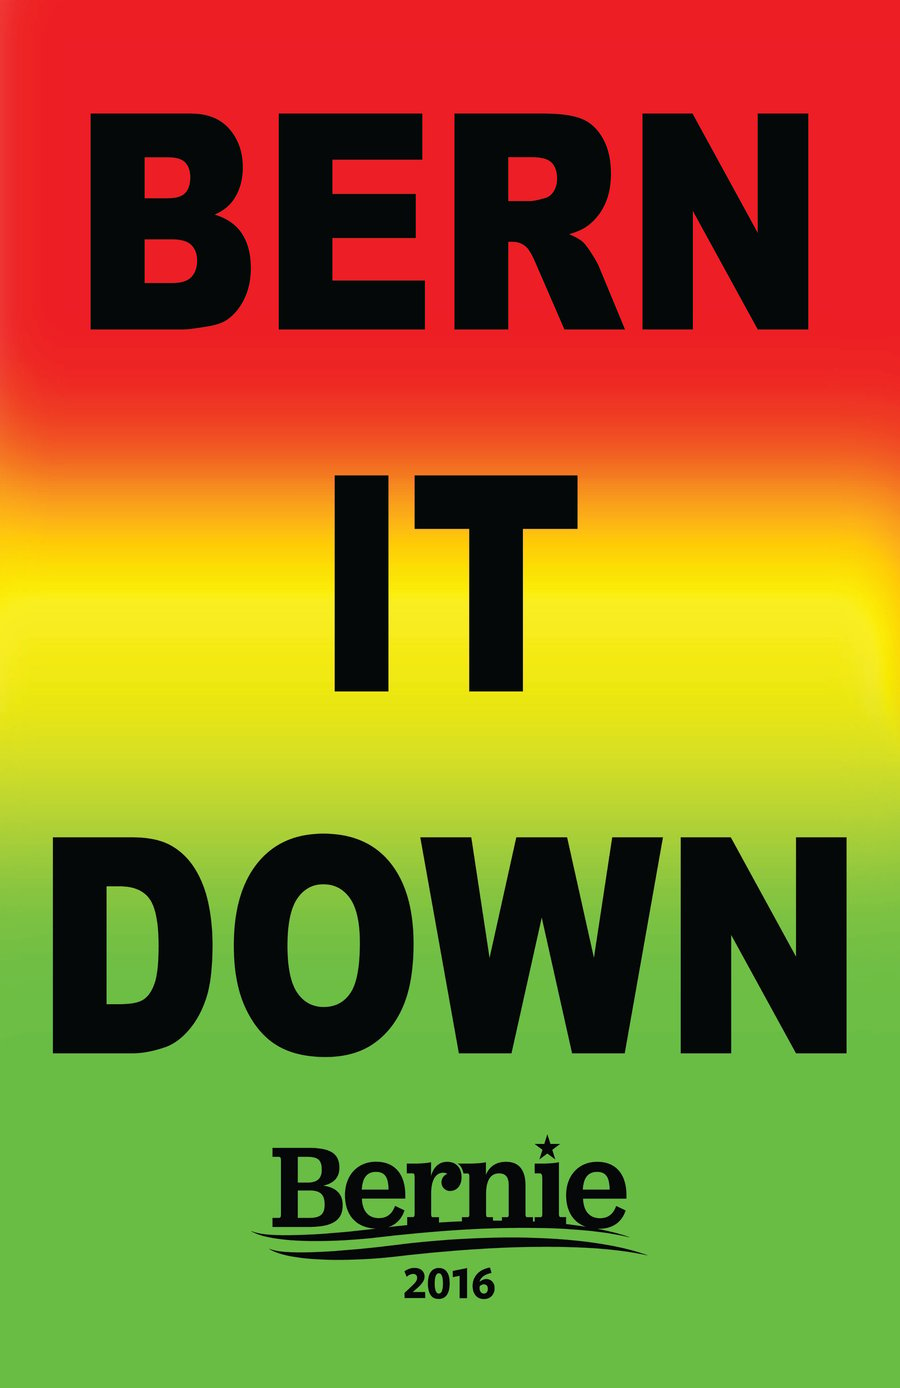 Image of BERN IT DOWN poster